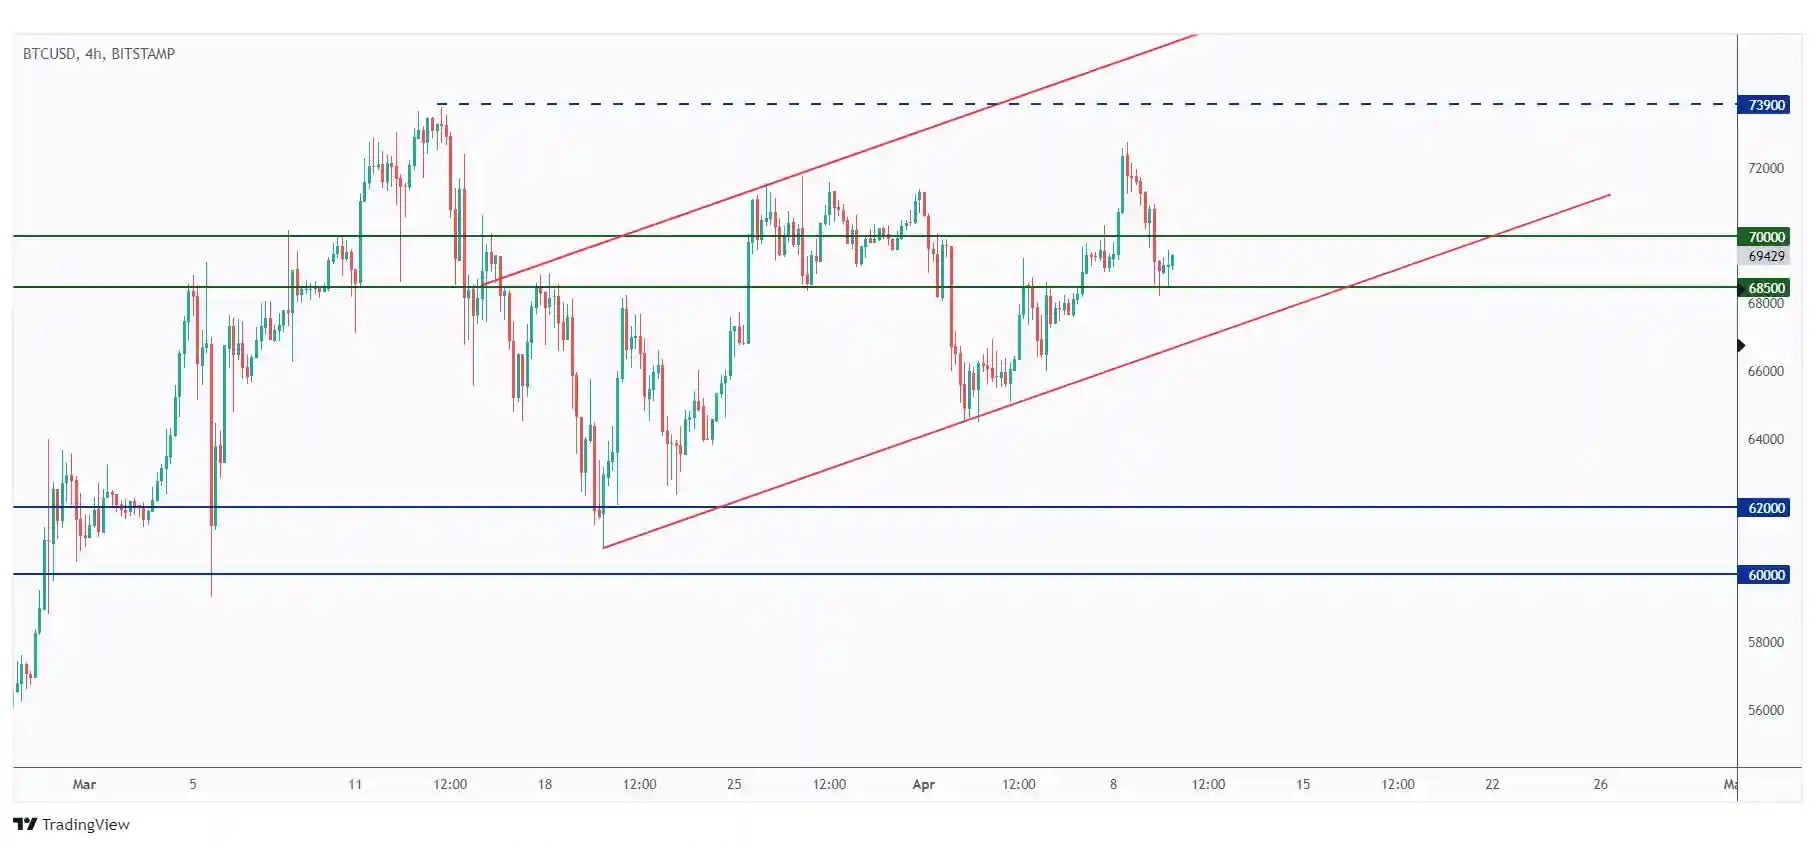 BTC 4h chart overall bullish trading within a rising channel.